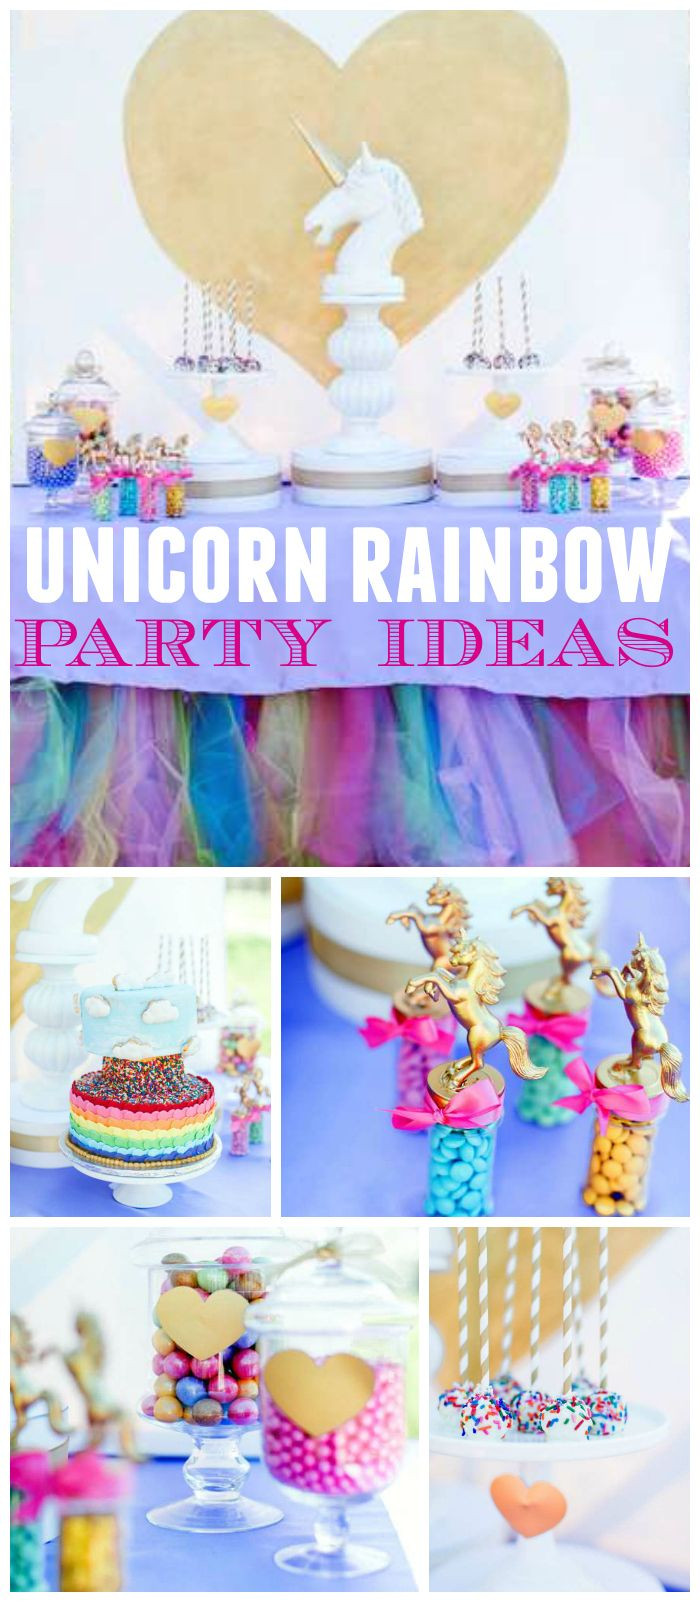 Unicorn And Rainbow Birthday Party Ideas
 77 best images about Gwen s first birthday on Pinterest